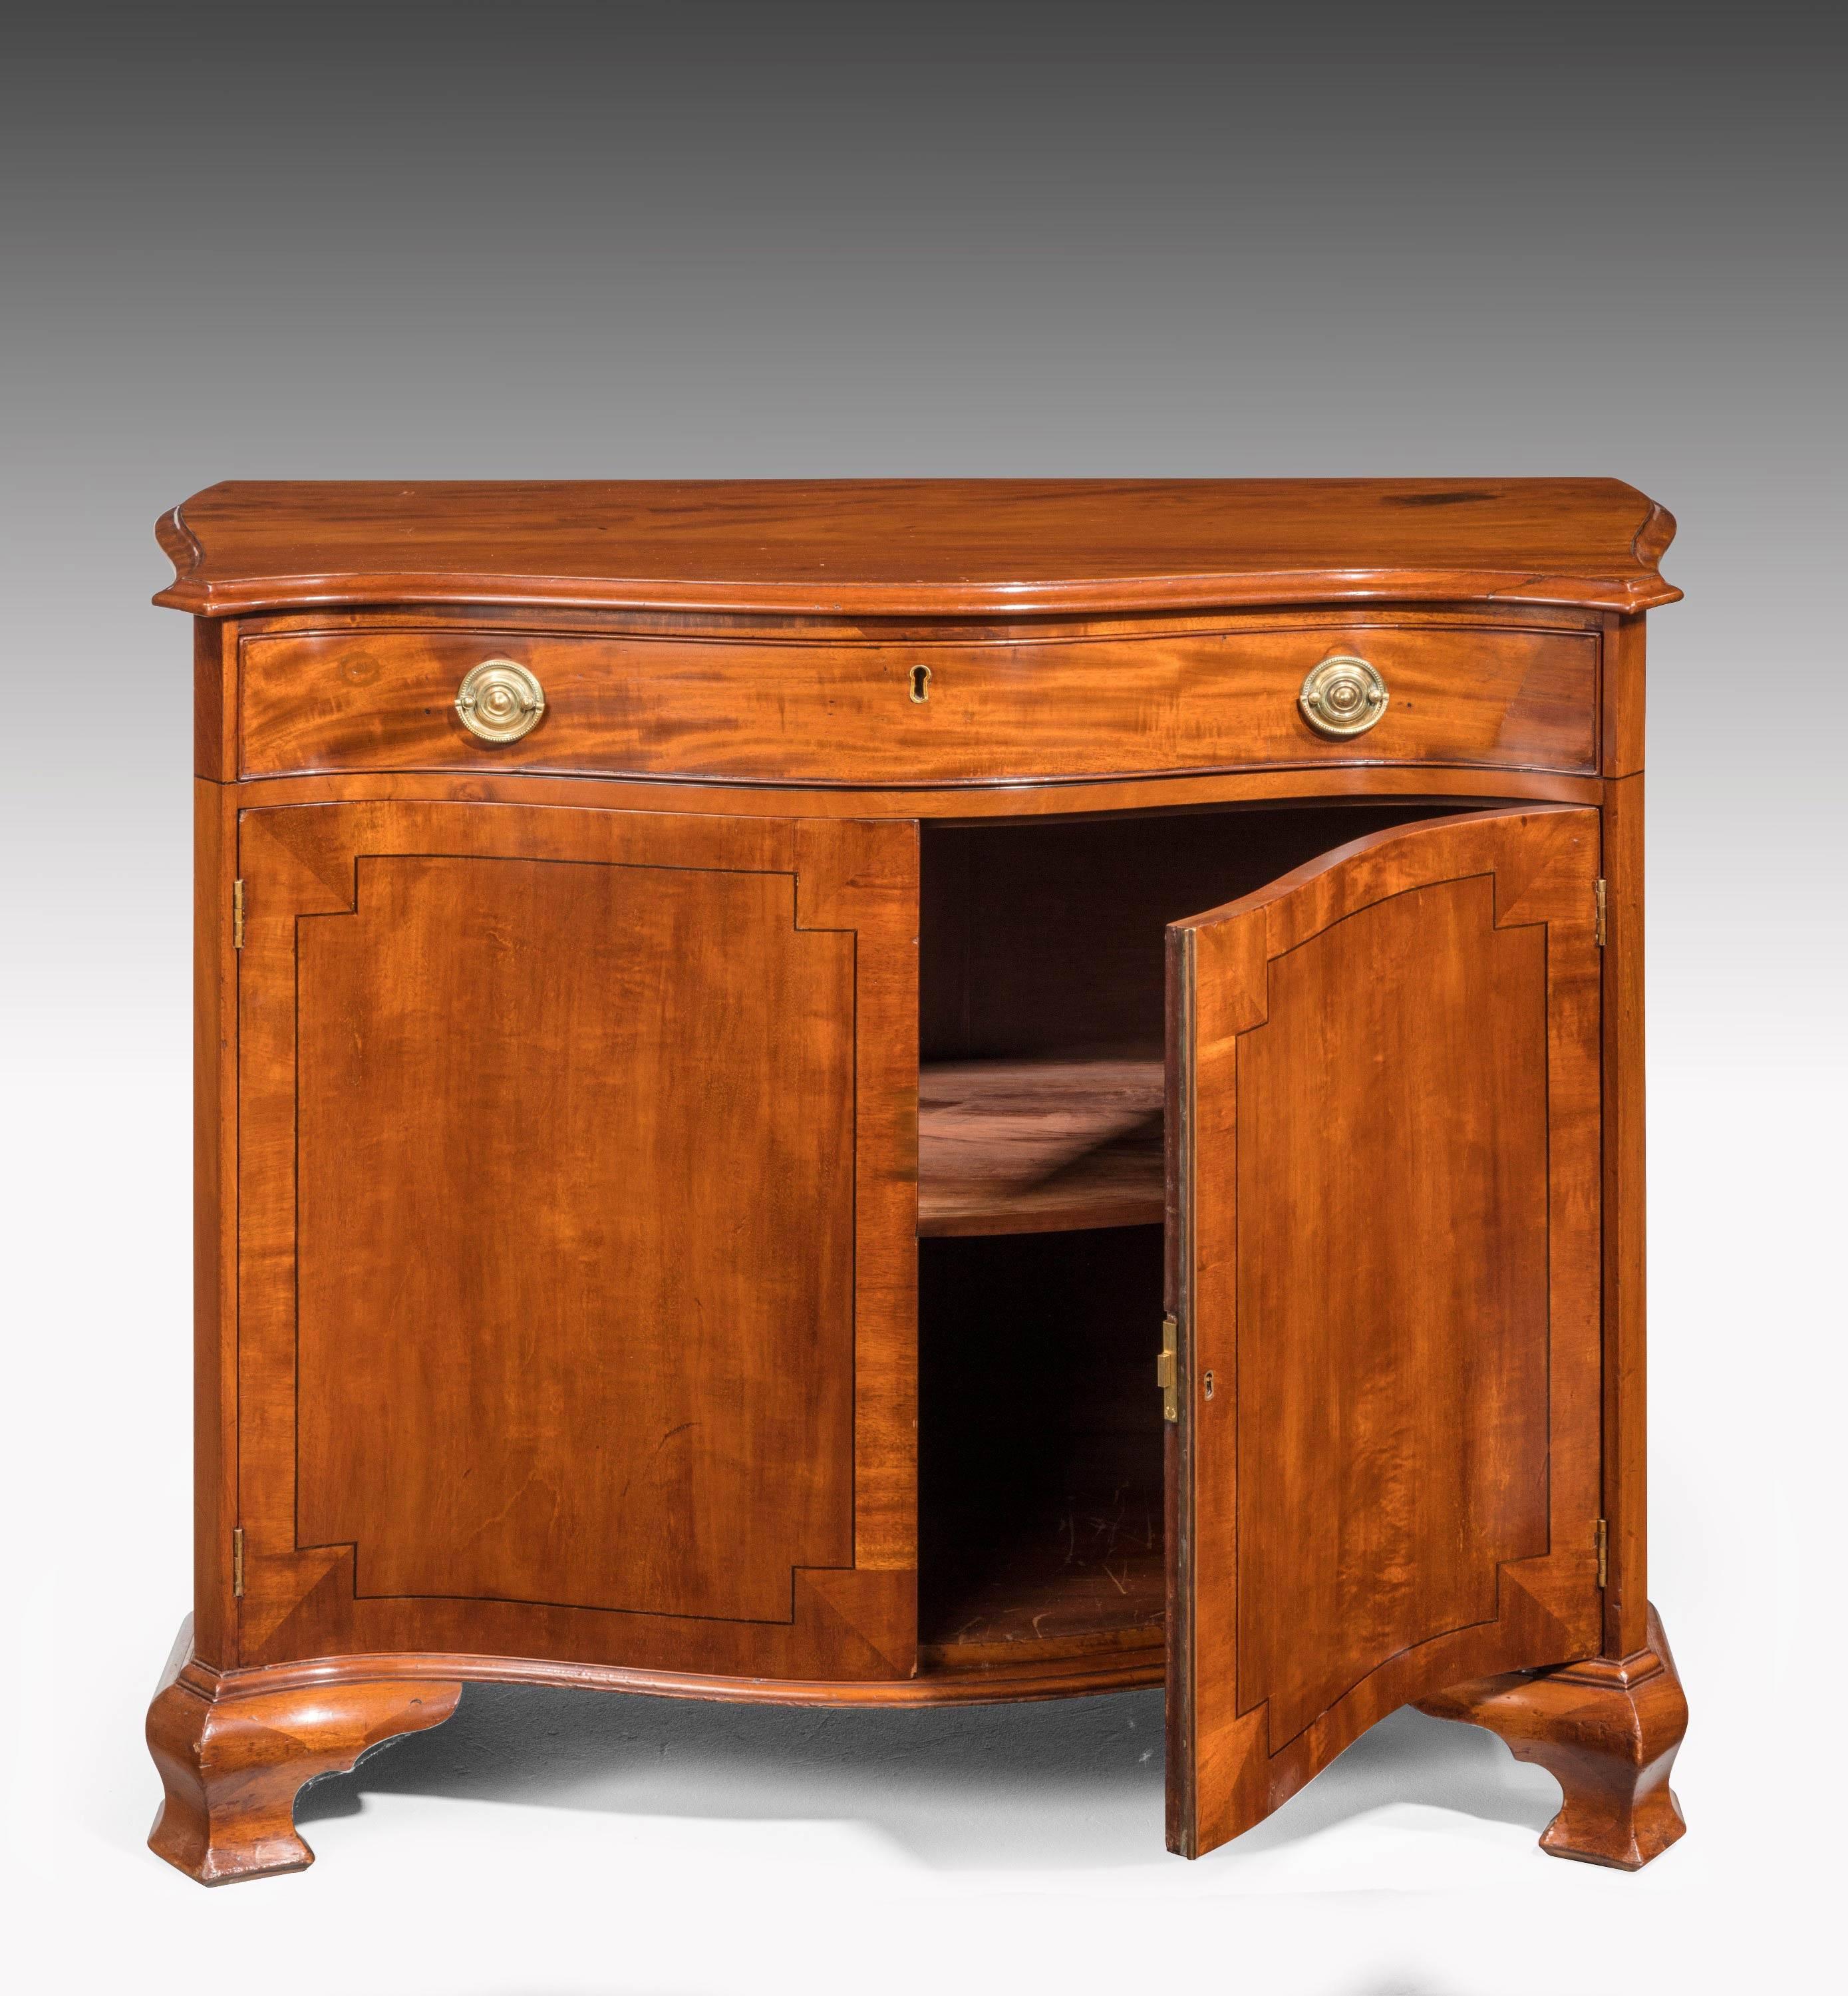 Chippendale period mahogany serpentine side cabinet or commode. On very well-formed ogee bracket feet. The doors crossbanded with inset quartered corners. The drawer retaining period brass.